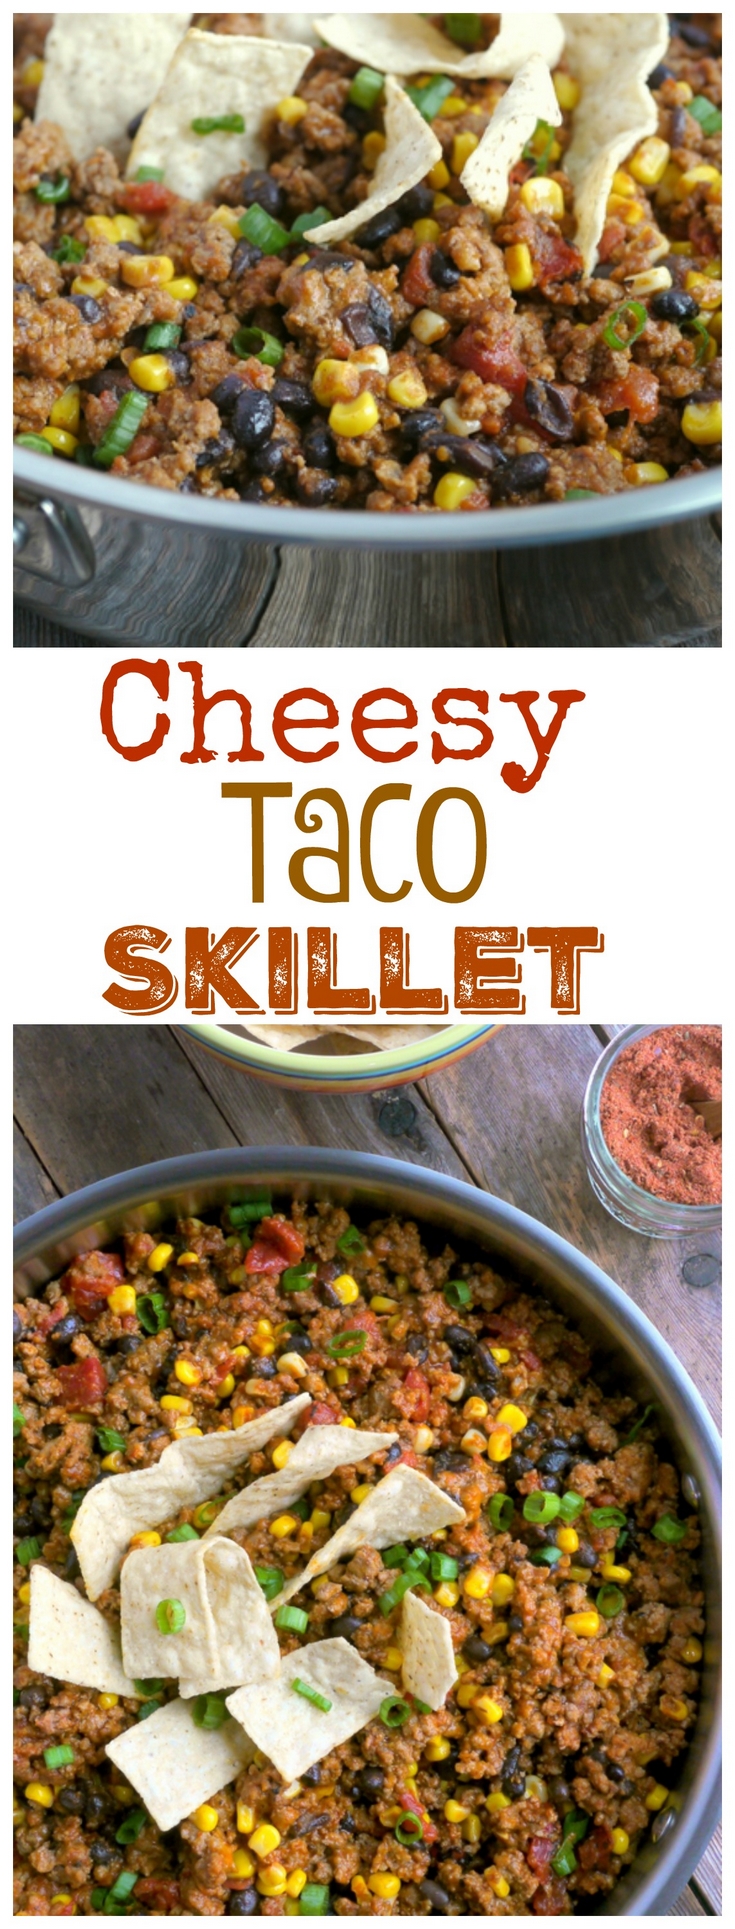 This delicious Cheesy Taco Skillet whips up in no time and has instantly become one of my family's favorite, dinner dishes. The special homemade seasoning mix gives this recipe a flavorful punch you're going to love from NoblePig.com. via @cmpollak1